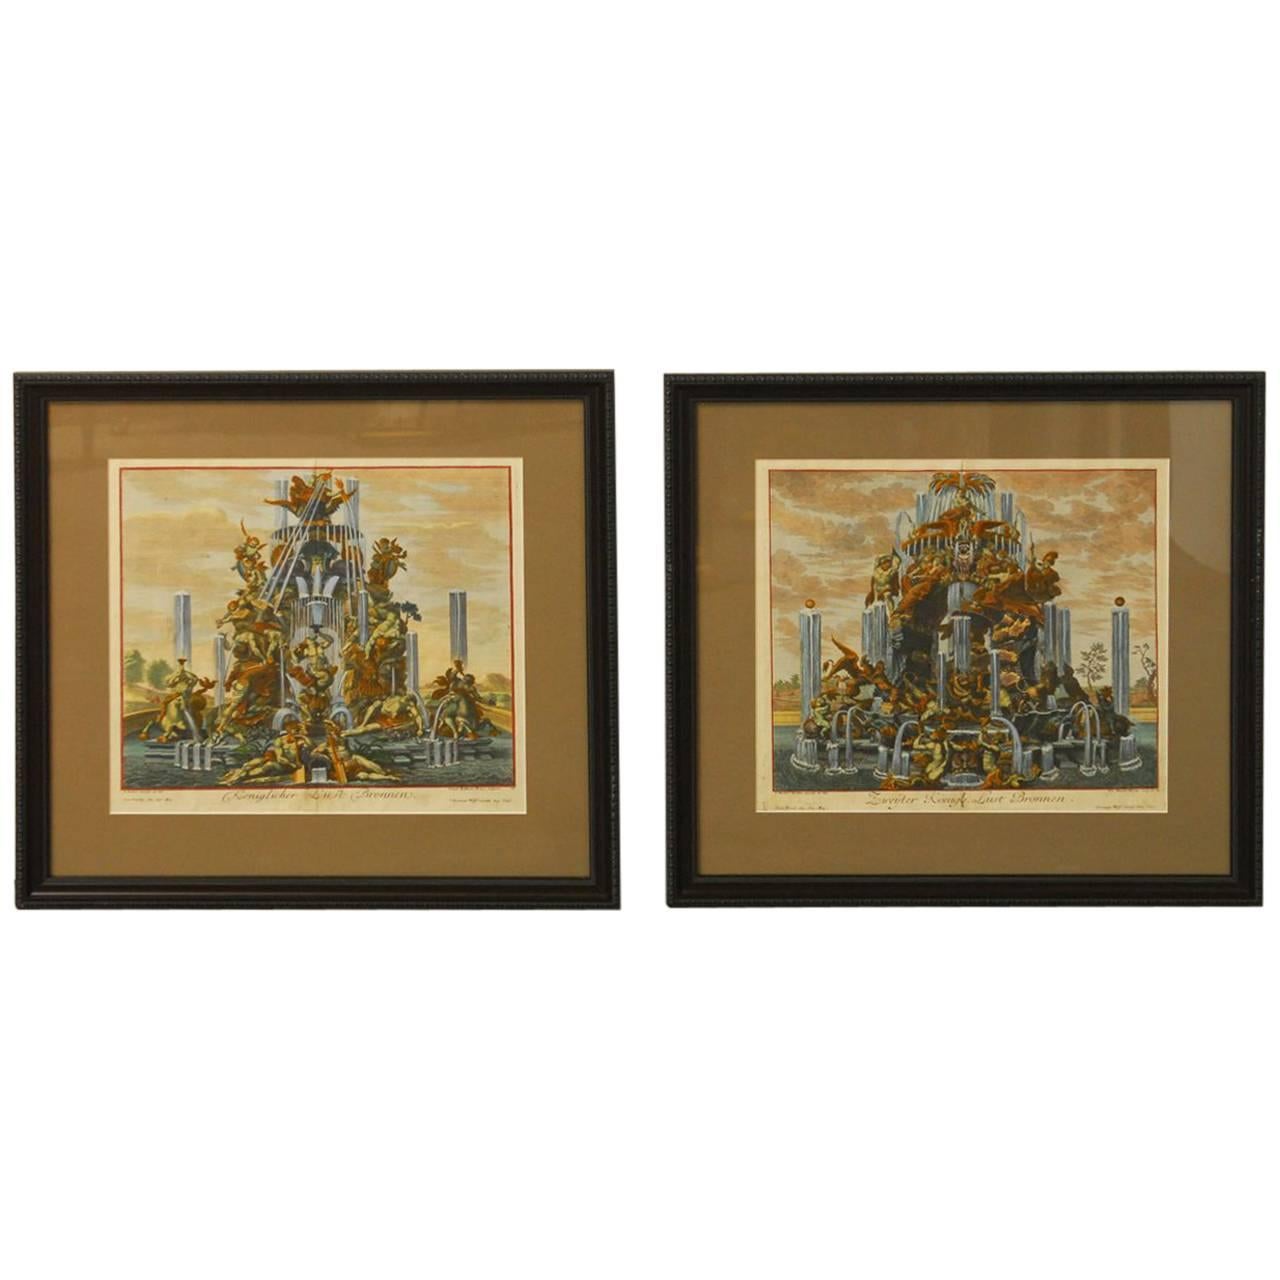 Gorgeous pair of etchings featuring battle scenes of Greco-Roman mythological characters set over a fountain. The scenes feature Hercules, the muses, cherubs, griffins, lions, bears, leopards, Pegasus and other heroes. Engraved by John Balthasar